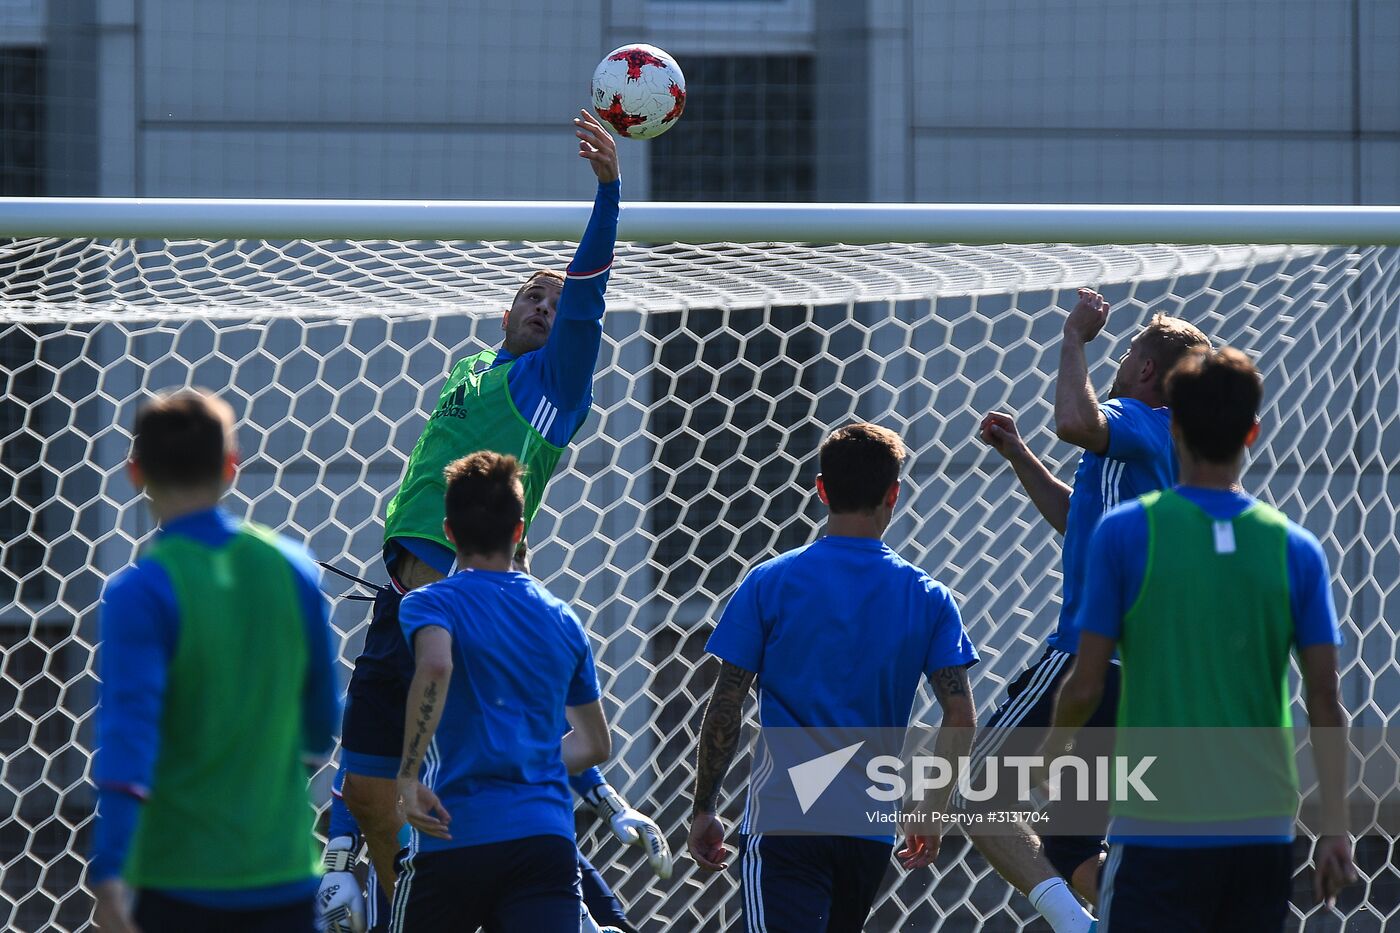 2017 FIFA Confederations Cup. Russia's national team holds training session